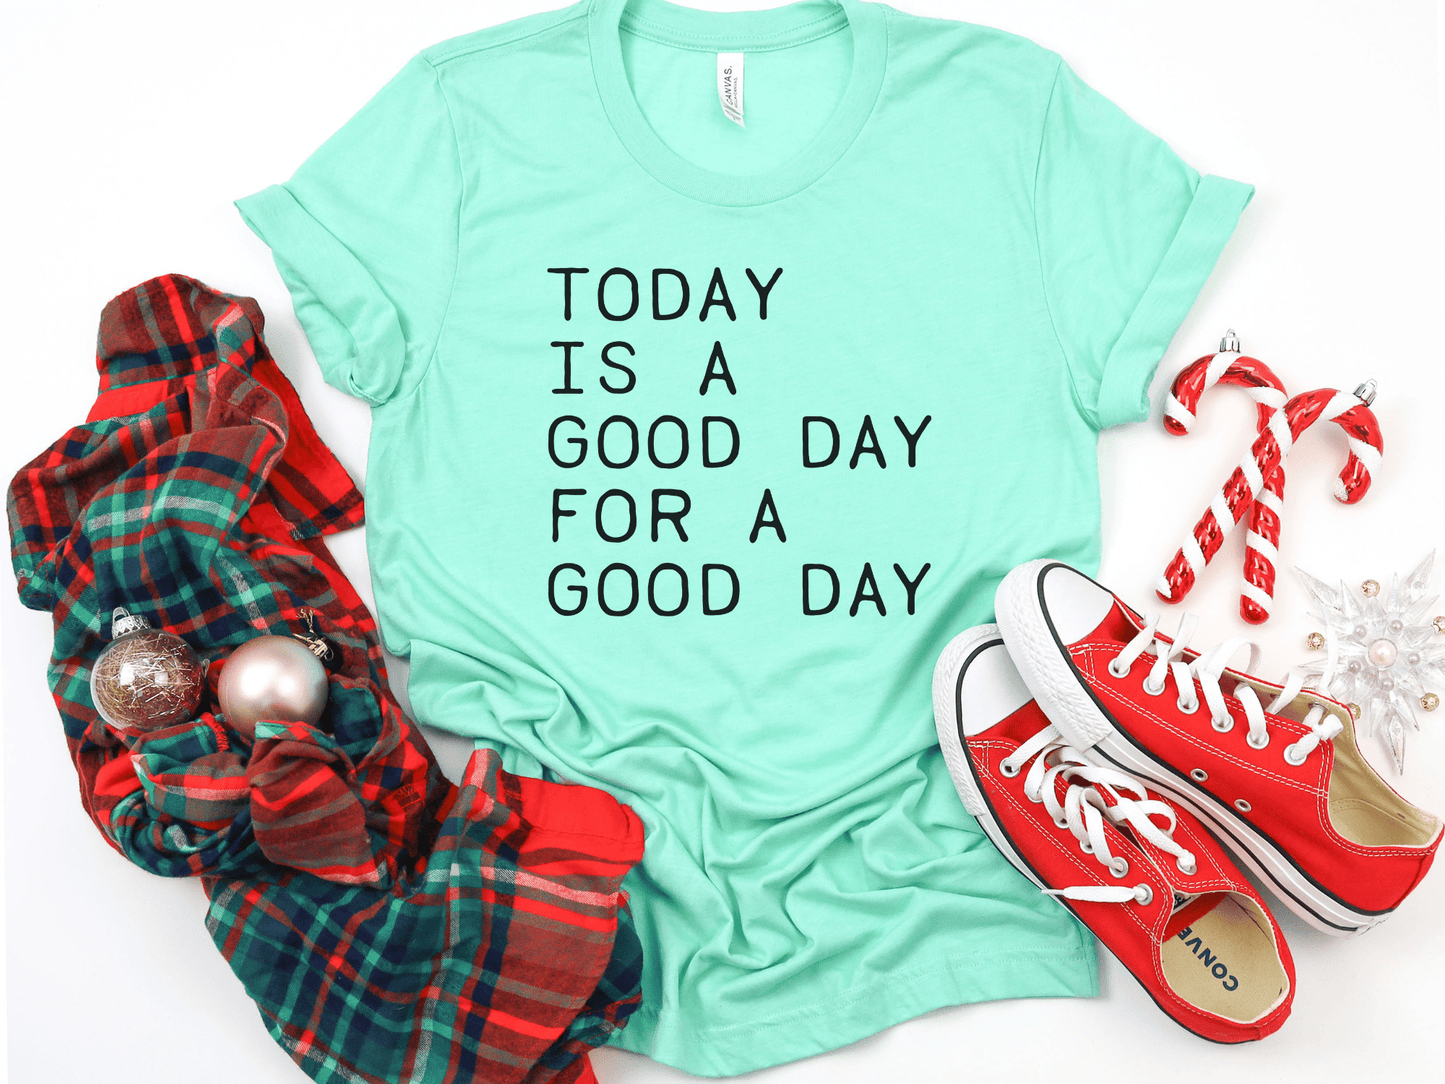 Today is a Good Day for a Good Day in Black Inspirational Graphic Tee